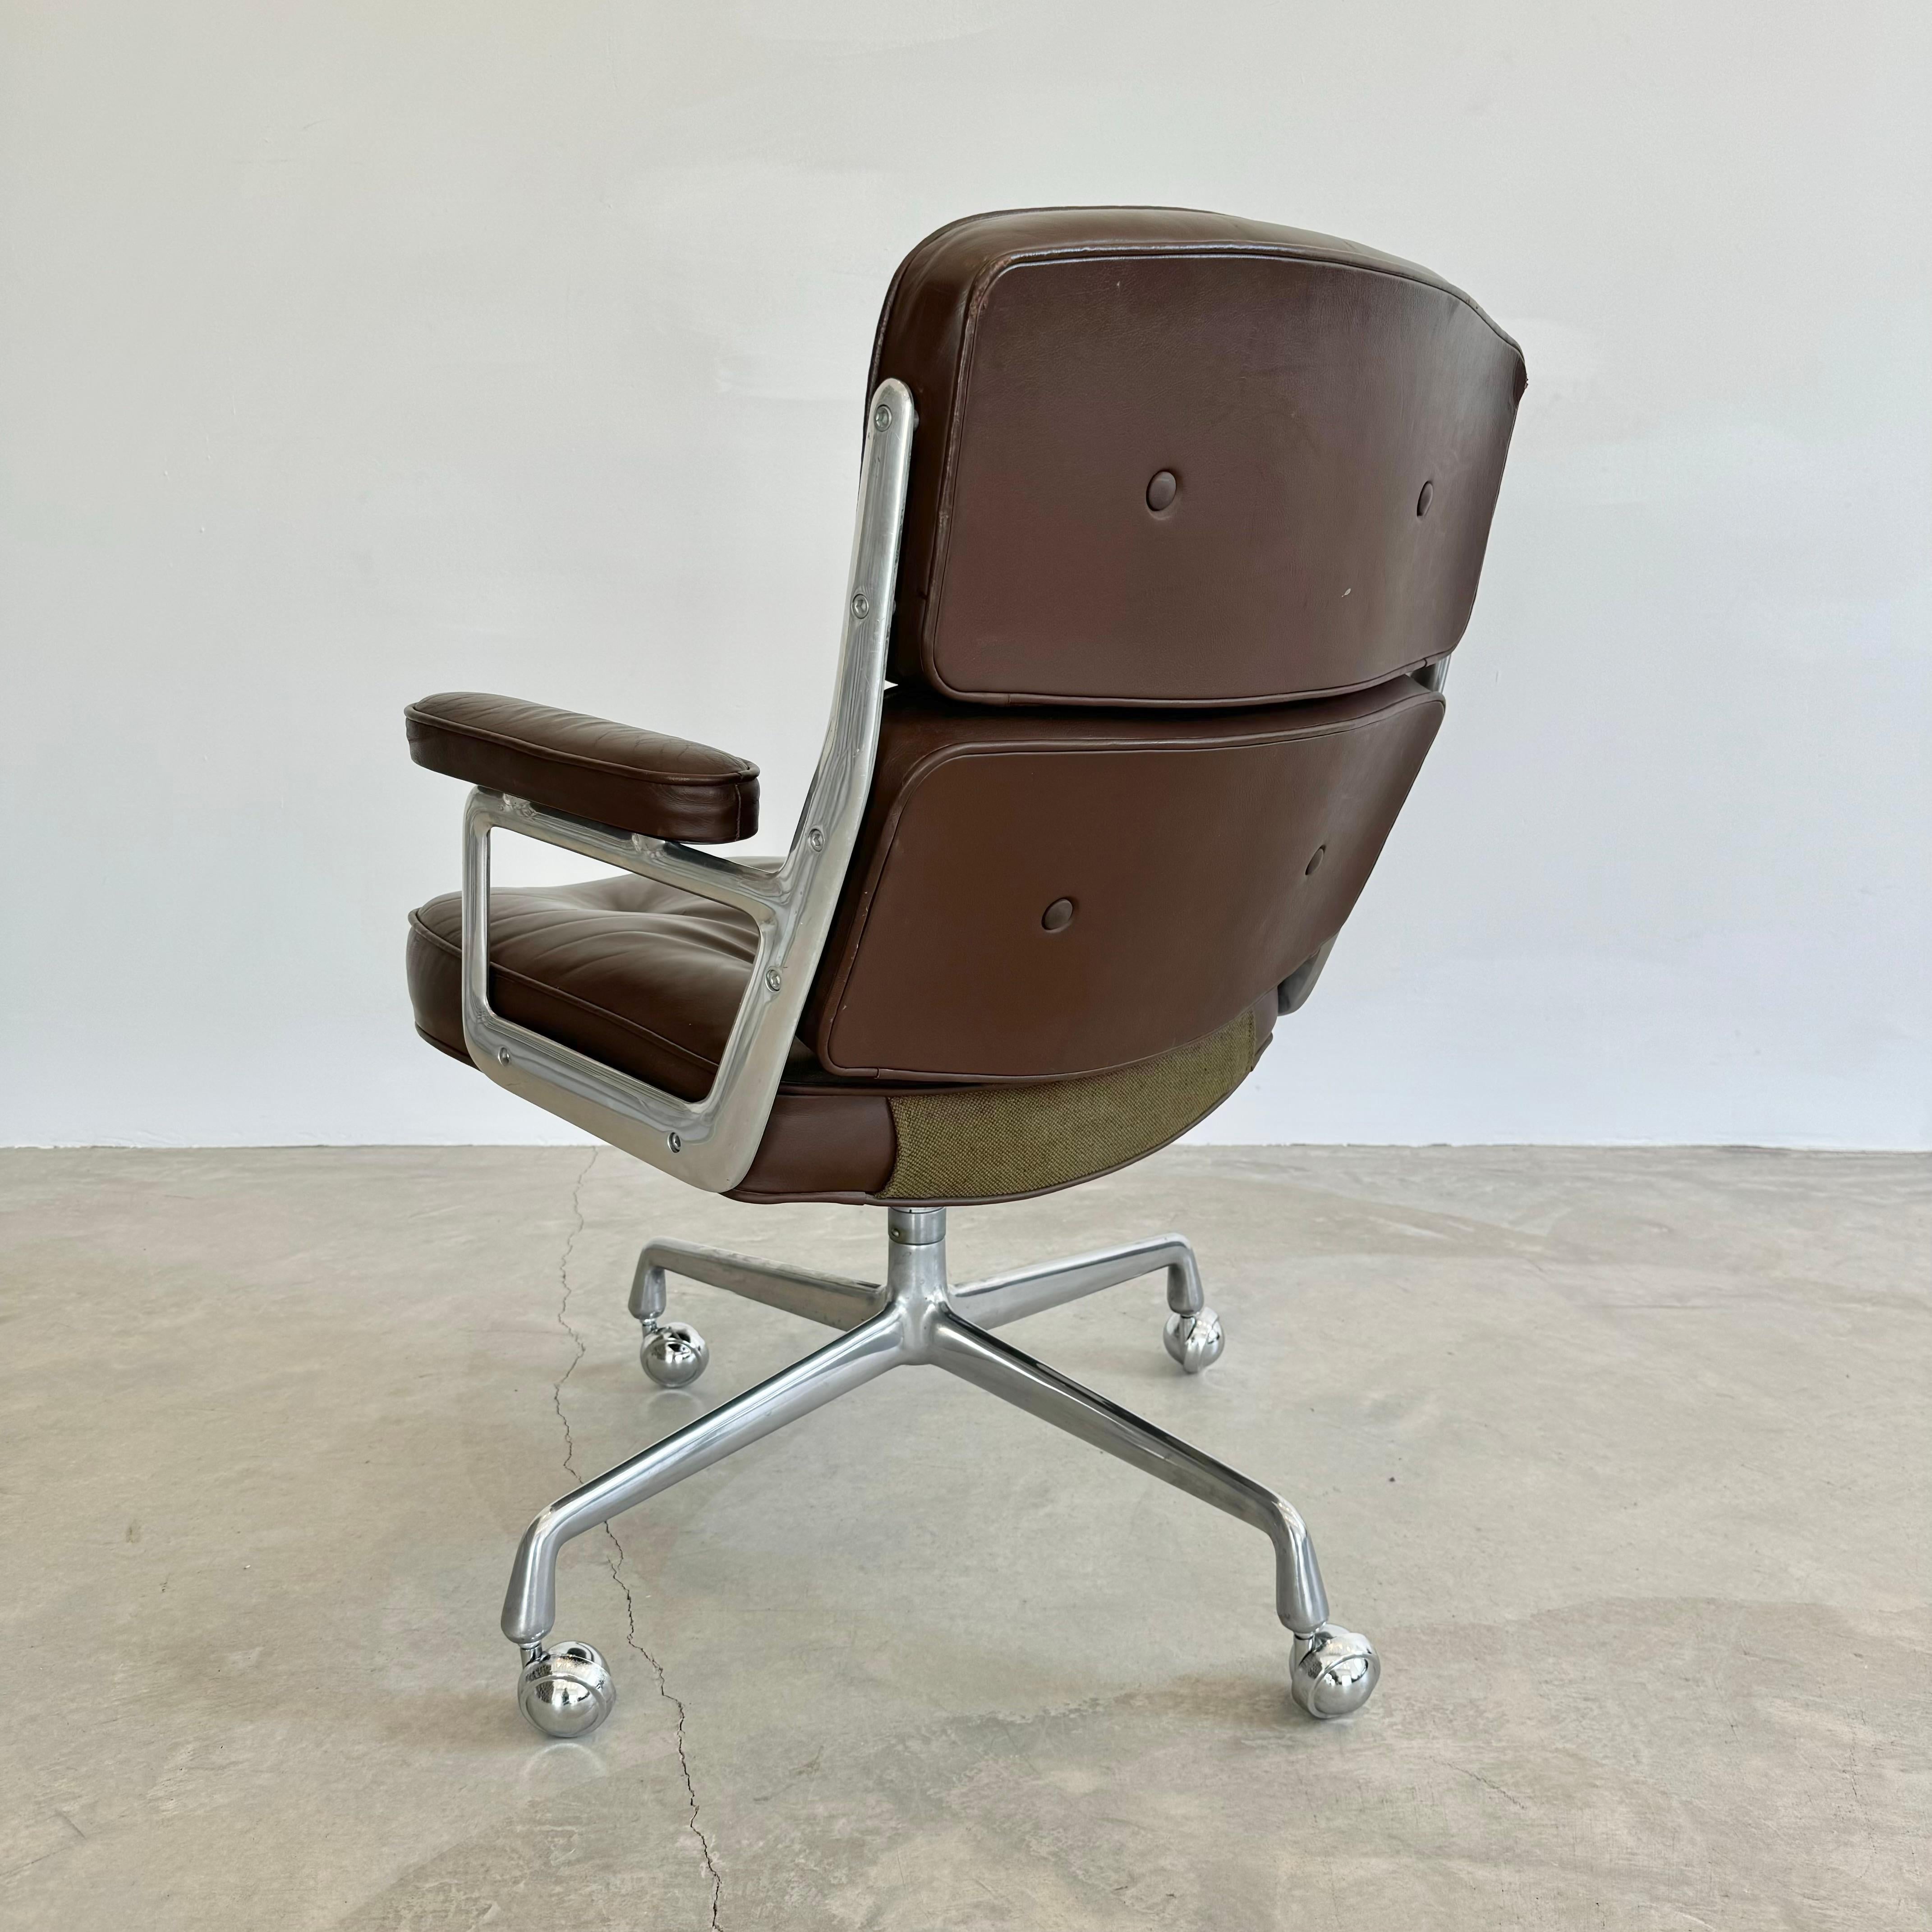 Eames Time Life Chair in Chocolate Leather for Herman Miller, 1978 USA For Sale 2